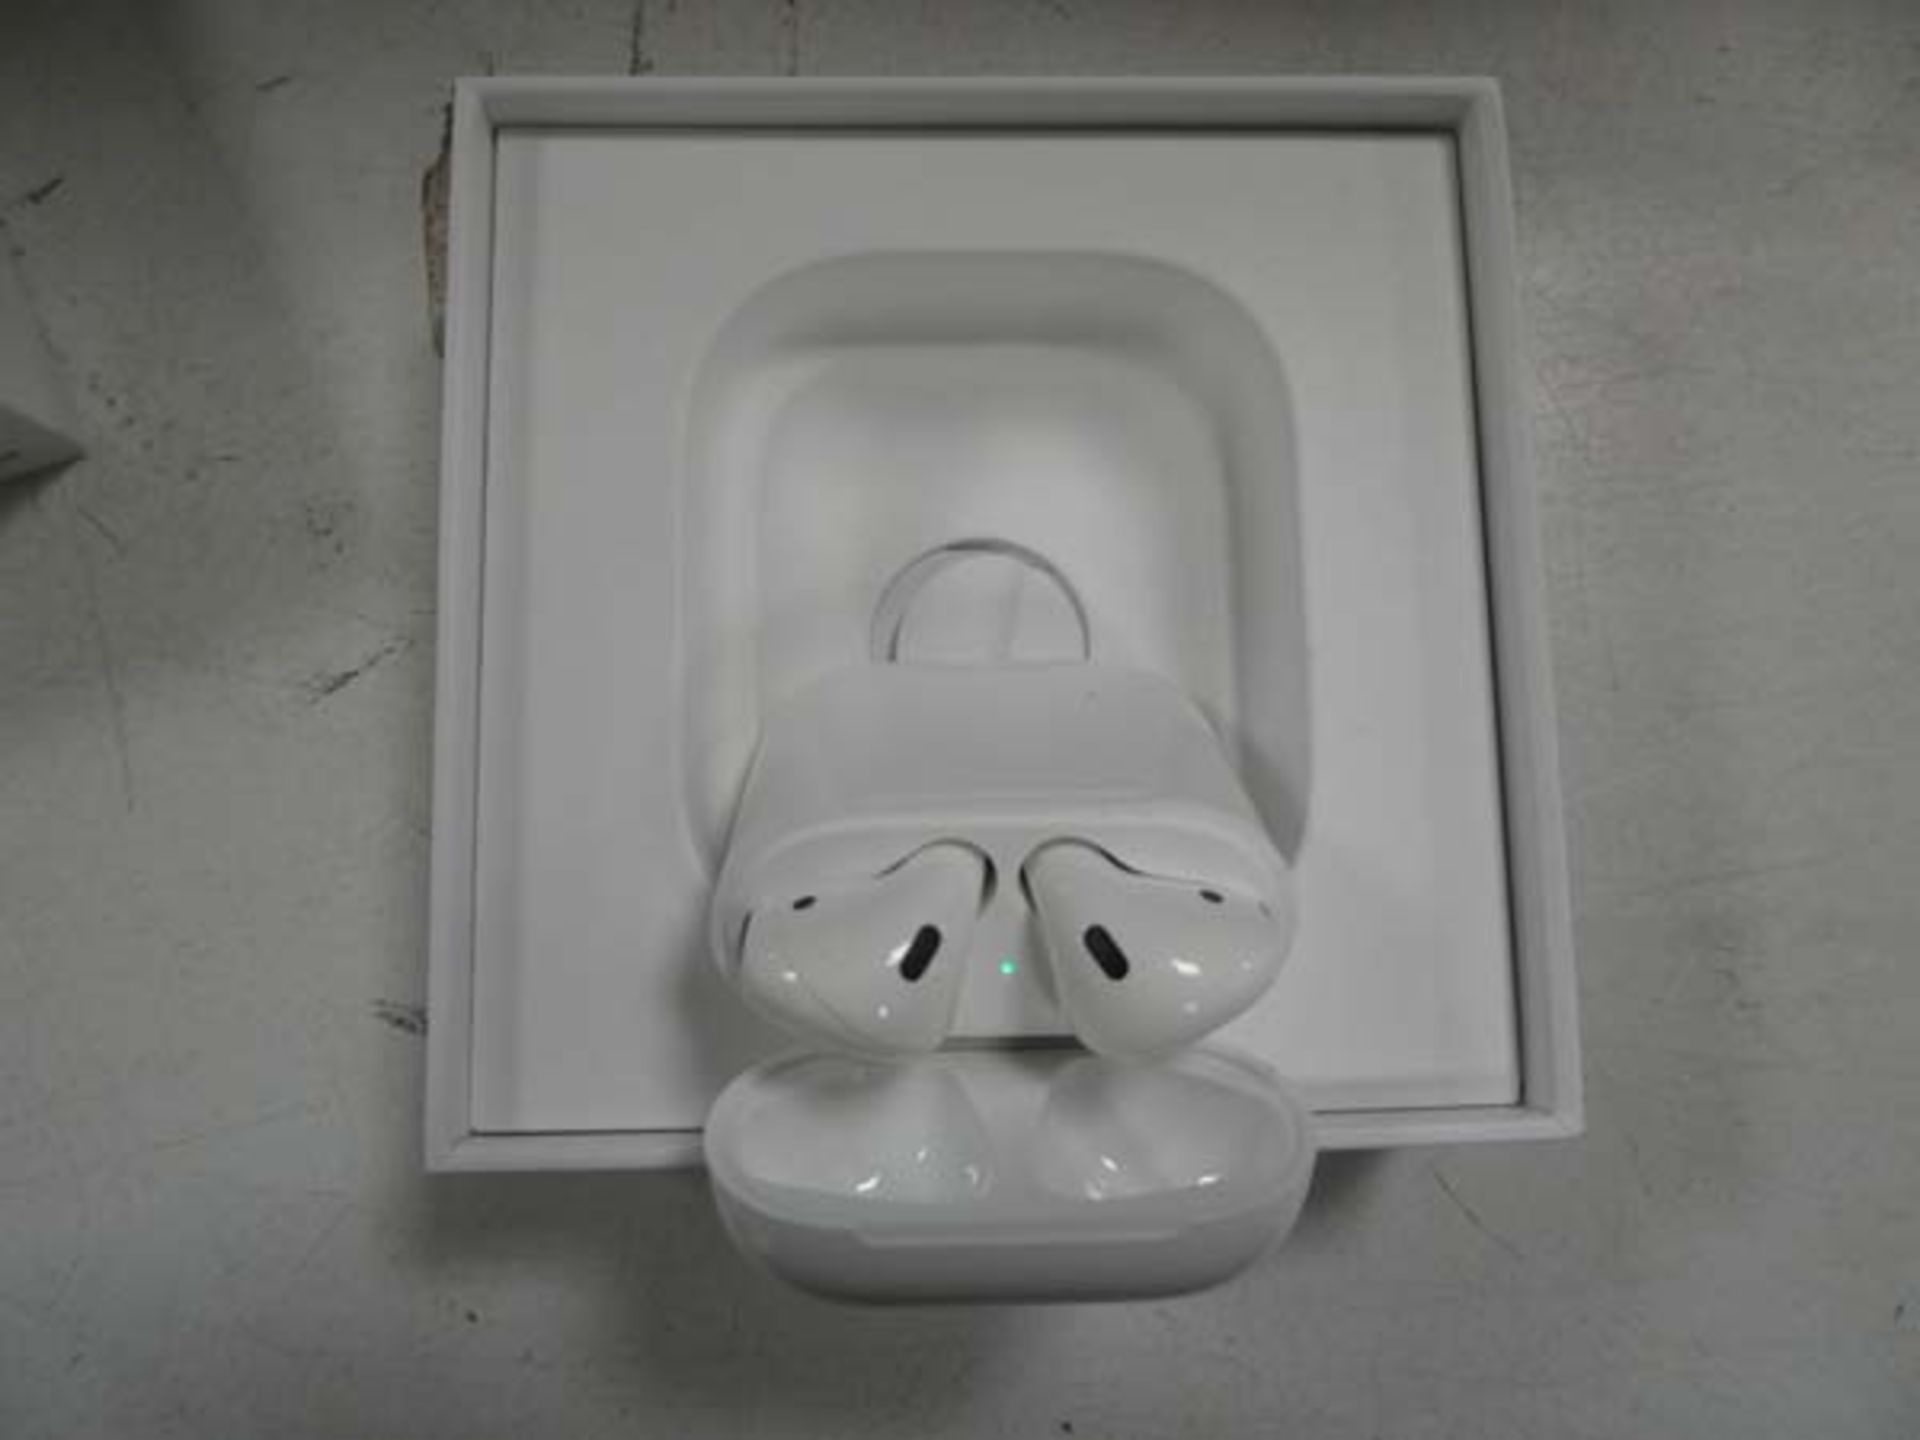 Apple AirPods 1st gen with charging case and box